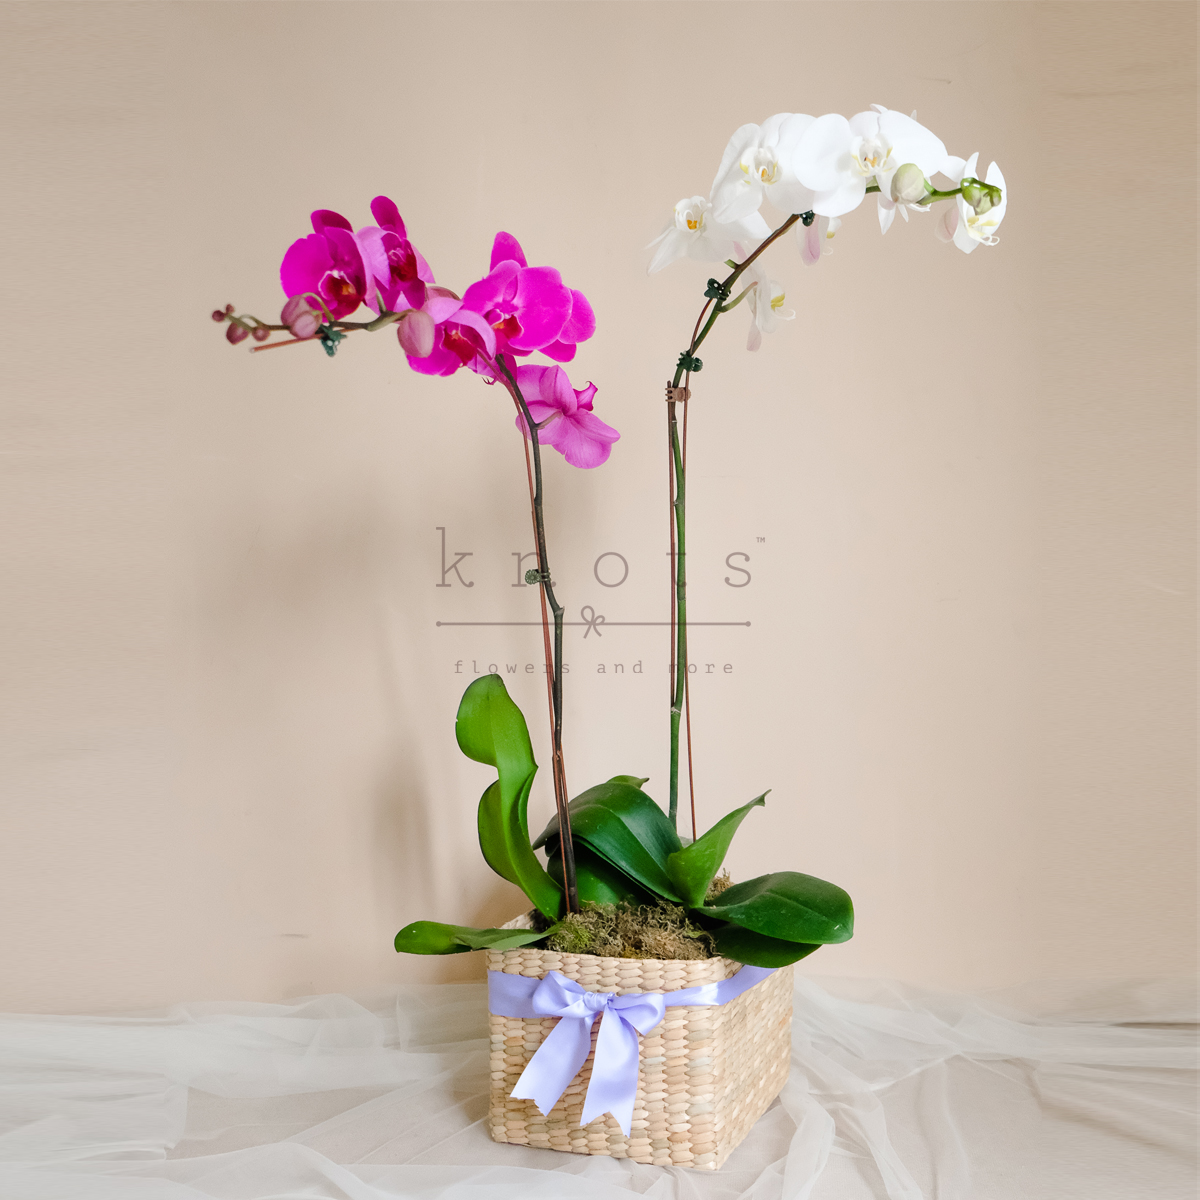 Sweetly Divine (Orchids in a Basket)